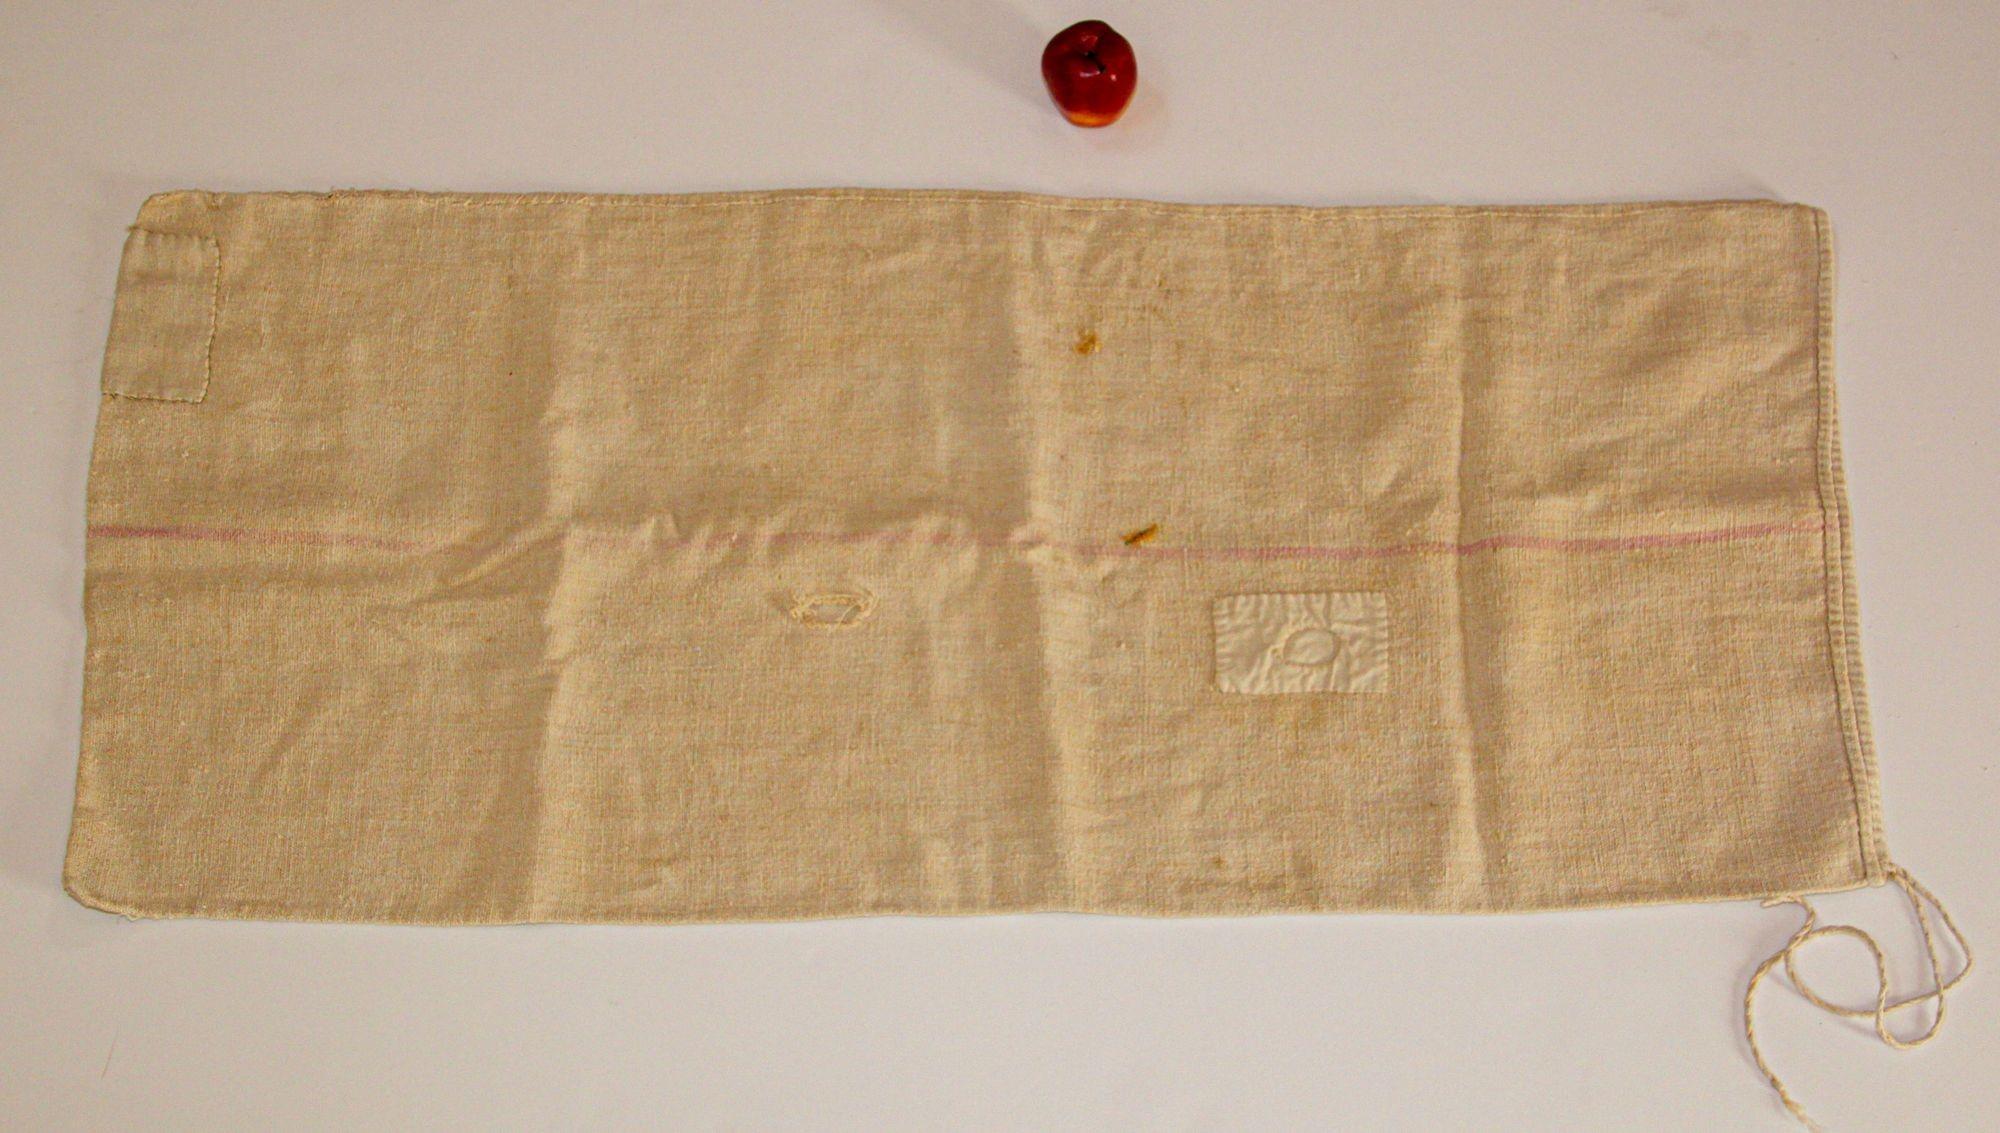 Antique European French long grain sack homespun linen organic fabric.
A large grain bag made of a narrow woven length of homespun linen that was folded over and hand-stitched along the long sides.
Antique grain sack, handwoven and hand loomed